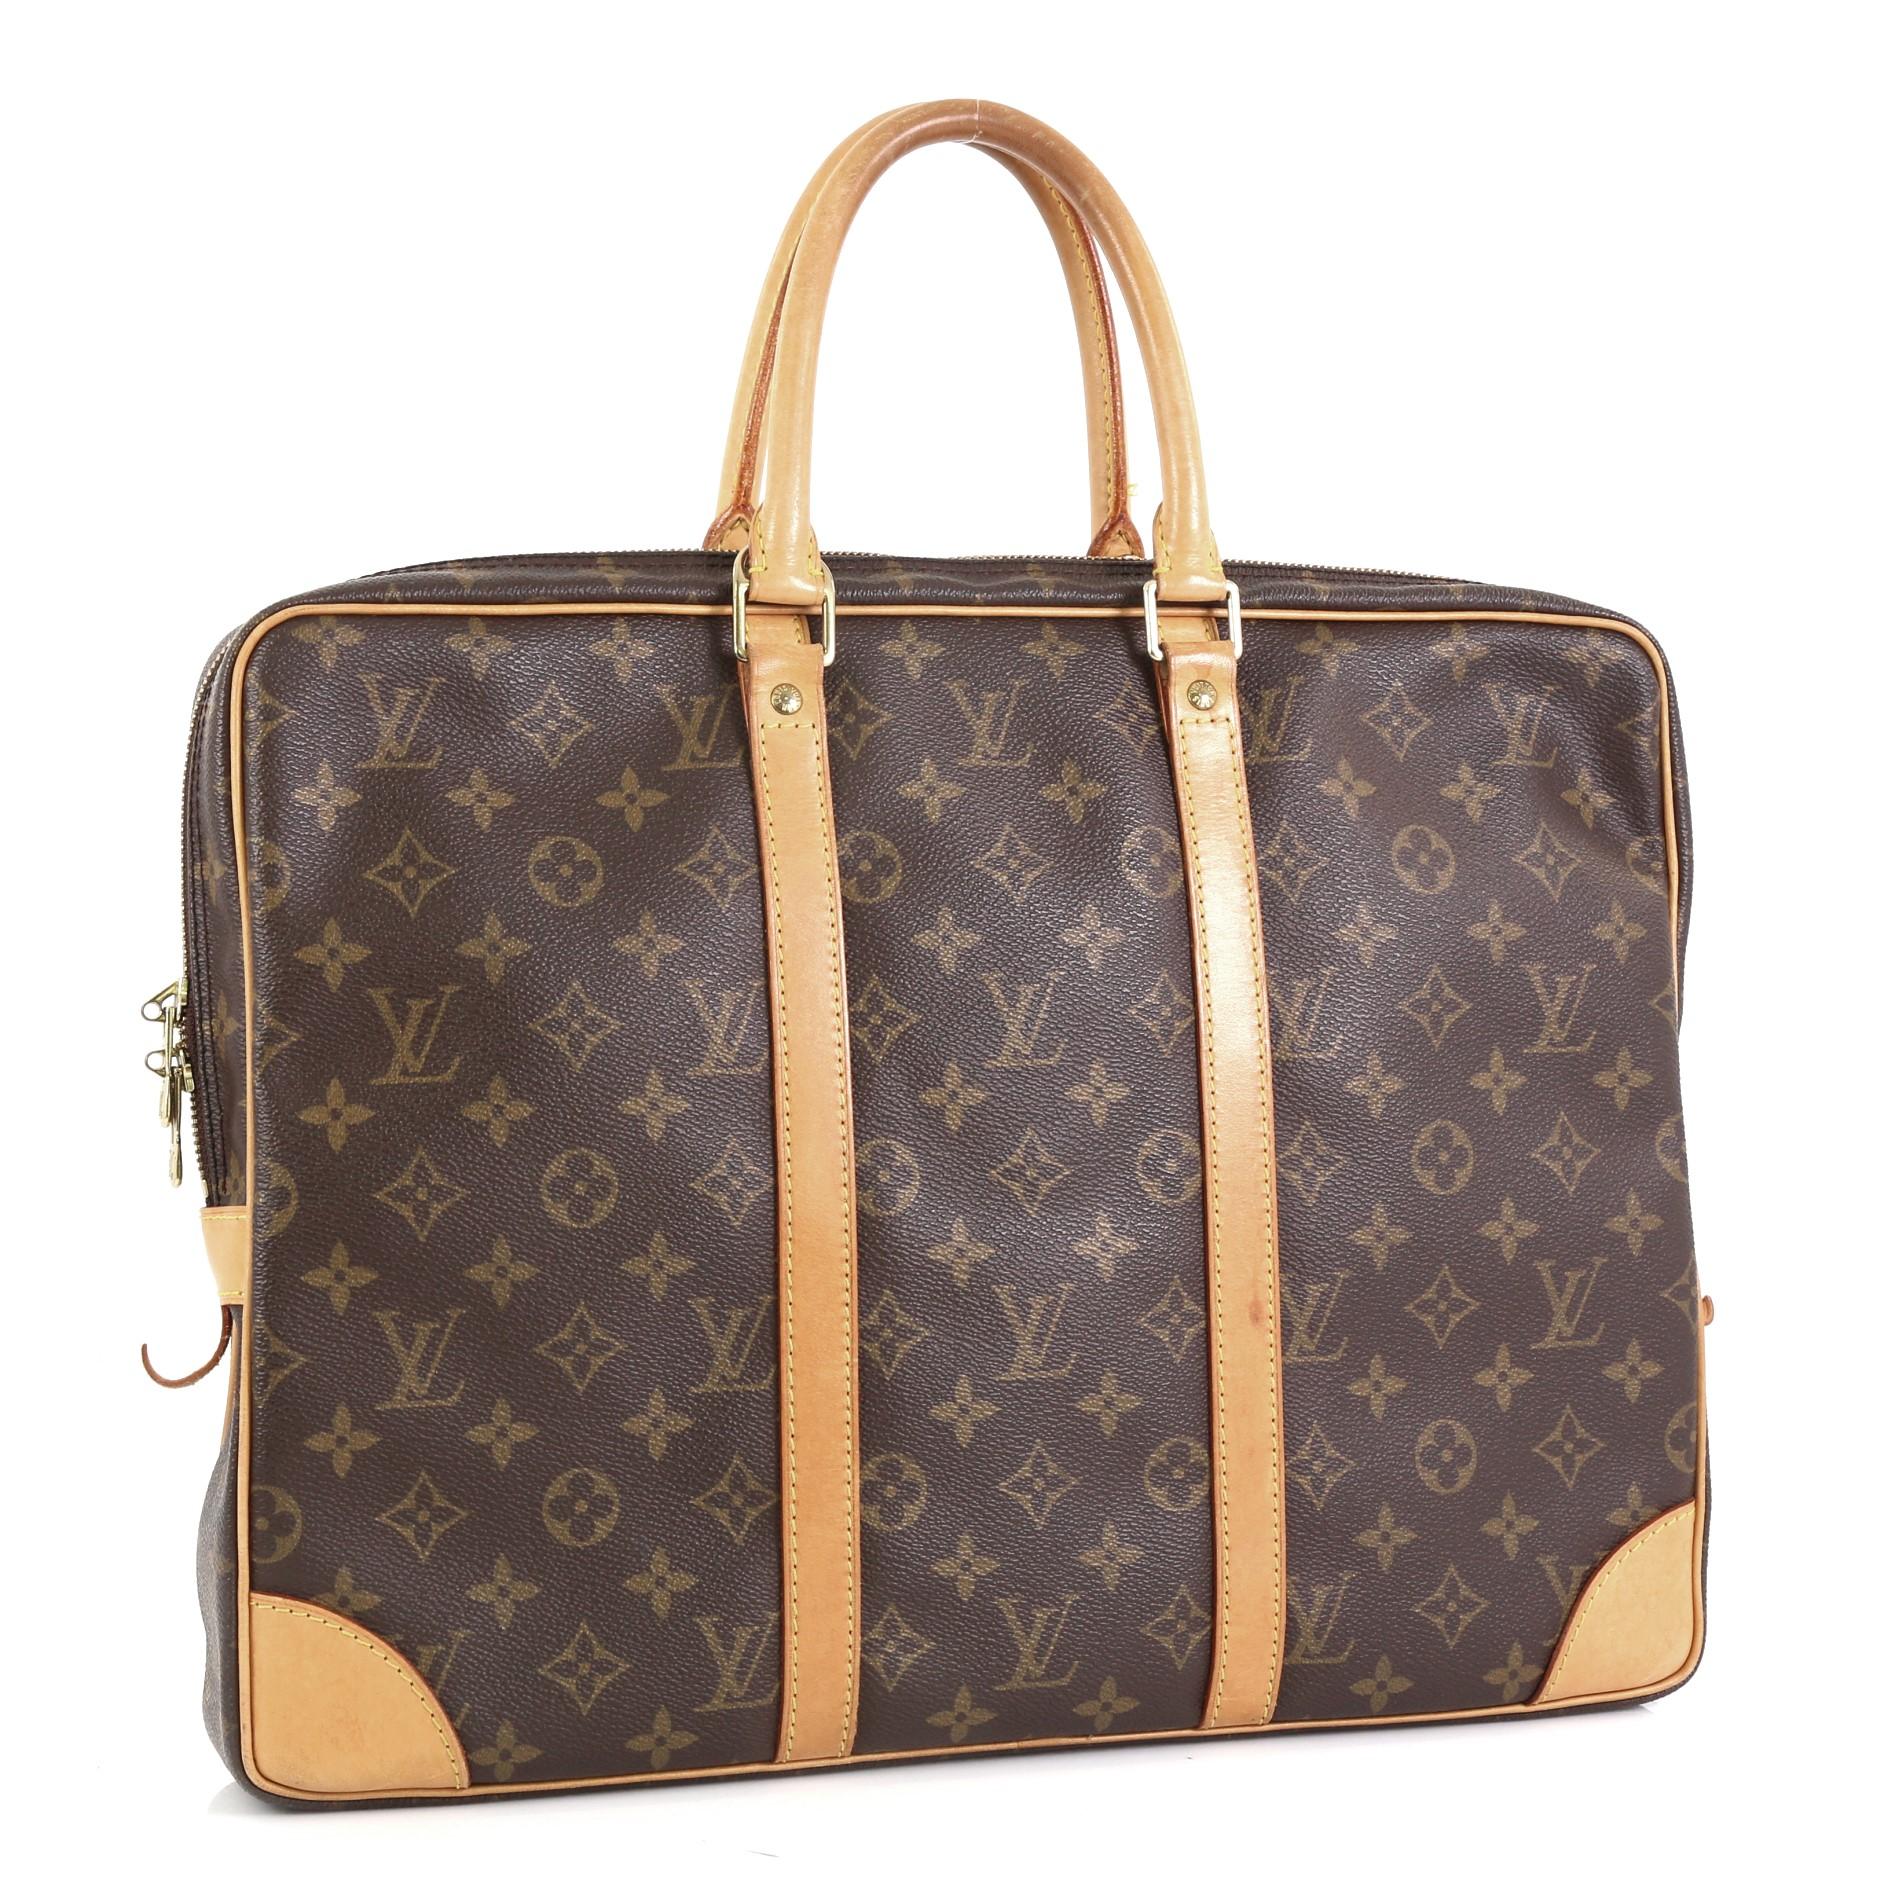 This Louis Vuitton Porte-Documents Voyage Briefcase Monogram Canvas, crafted from brown monogram coated canvas, features dual rolled handles, leather trim, and gold-tone hardware. Its zip closure opens to a brown leather interior with zip and slip